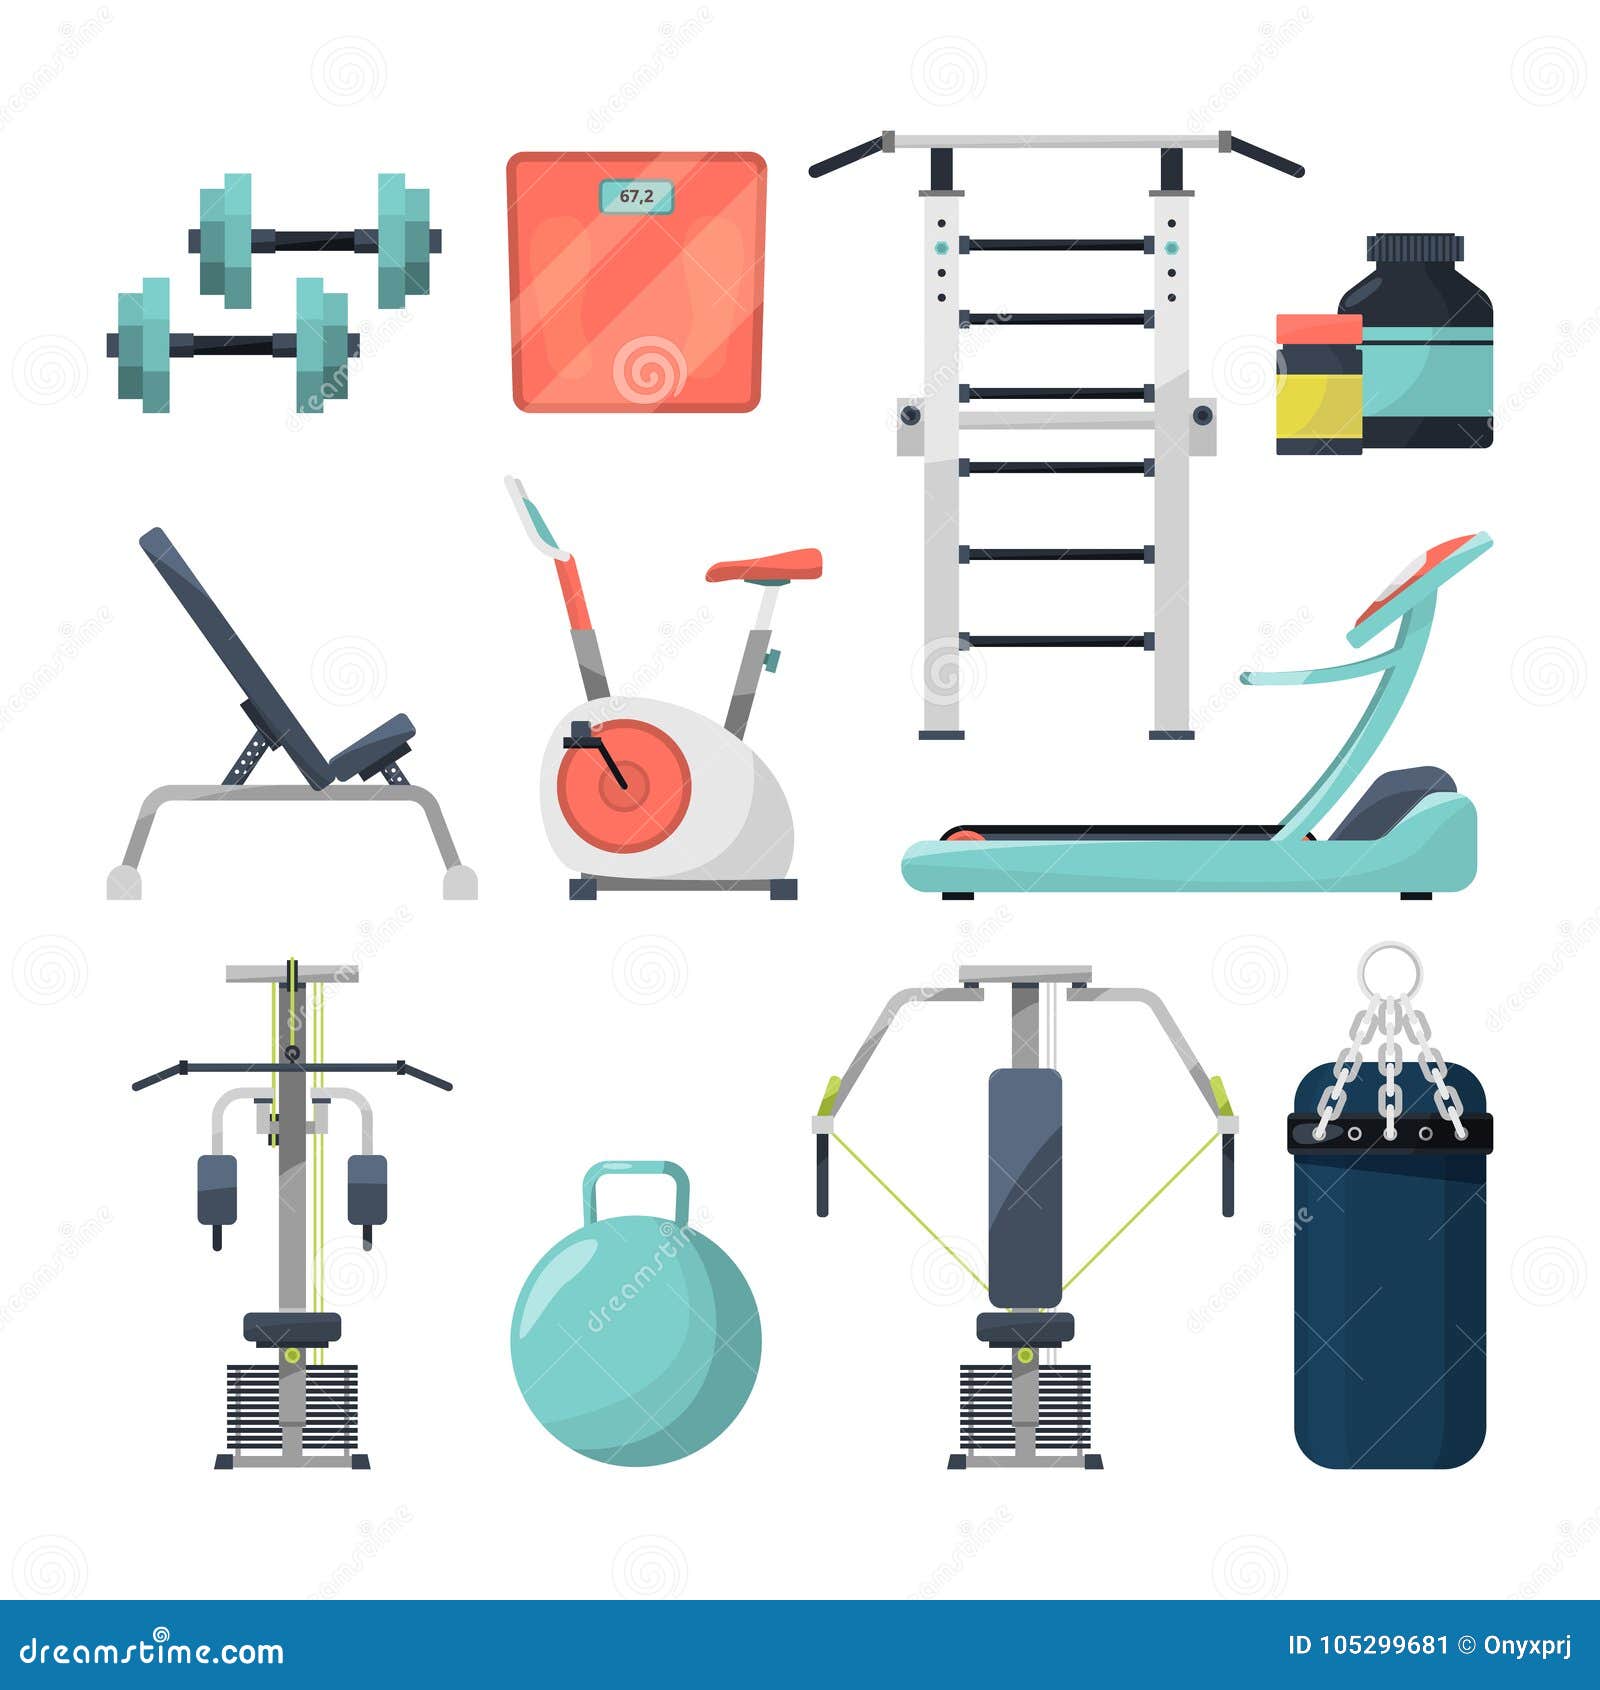 https://thumbs.dreamstime.com/z/different-fitness-items-gym-illustration-equipment-bodybuilding-objects-barbell-dumbbell-105299681.jpg